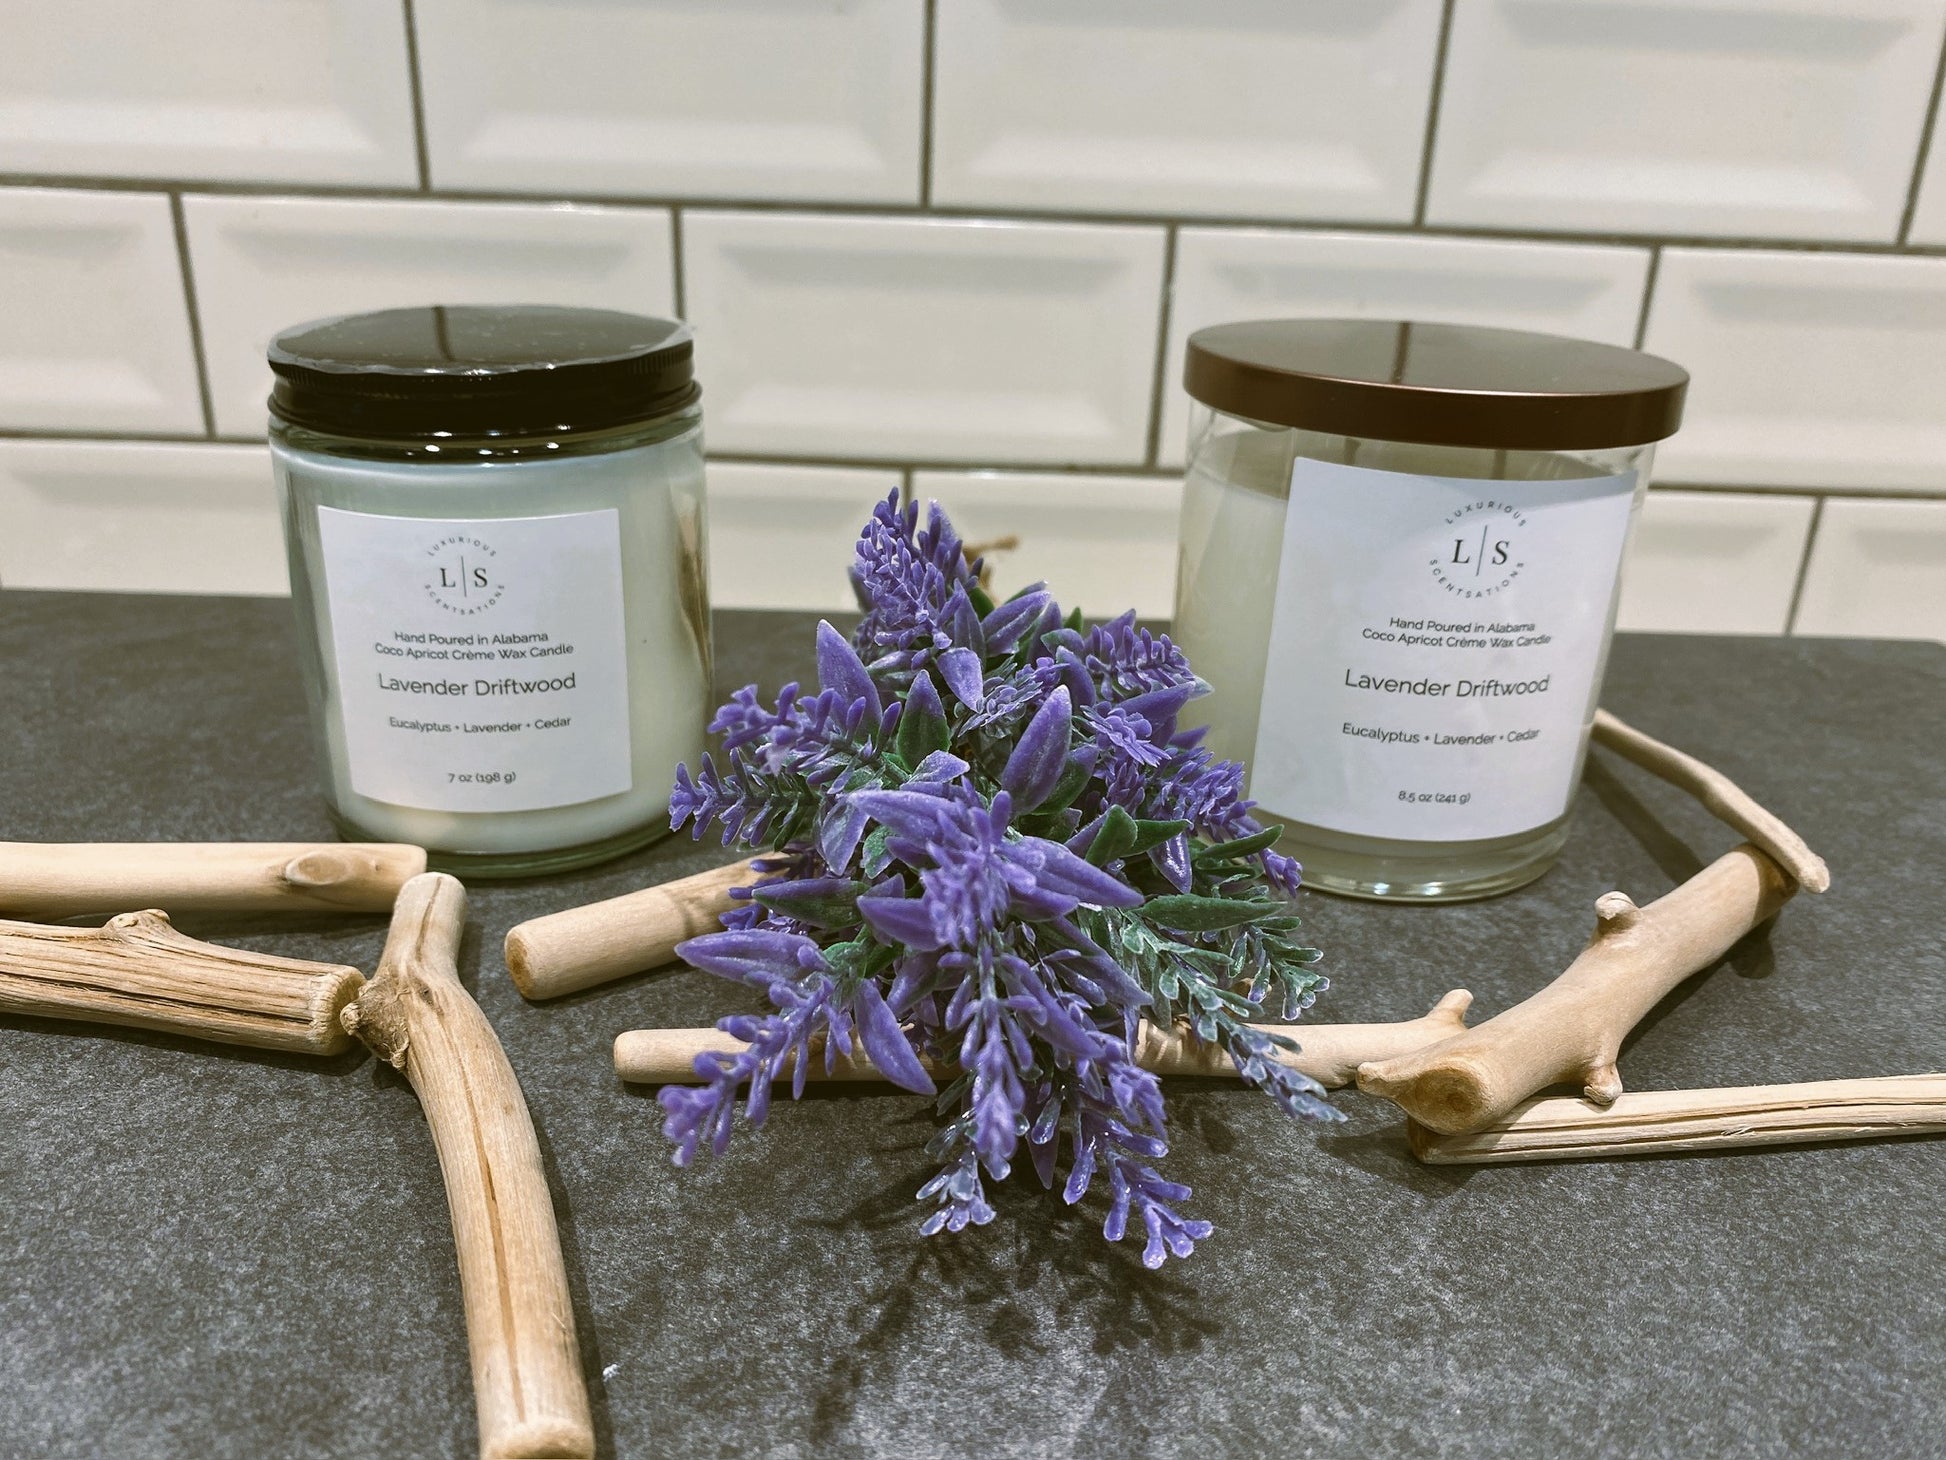 Image of Lavender Driftwood candle by Luxurious Scentsations of Alabama